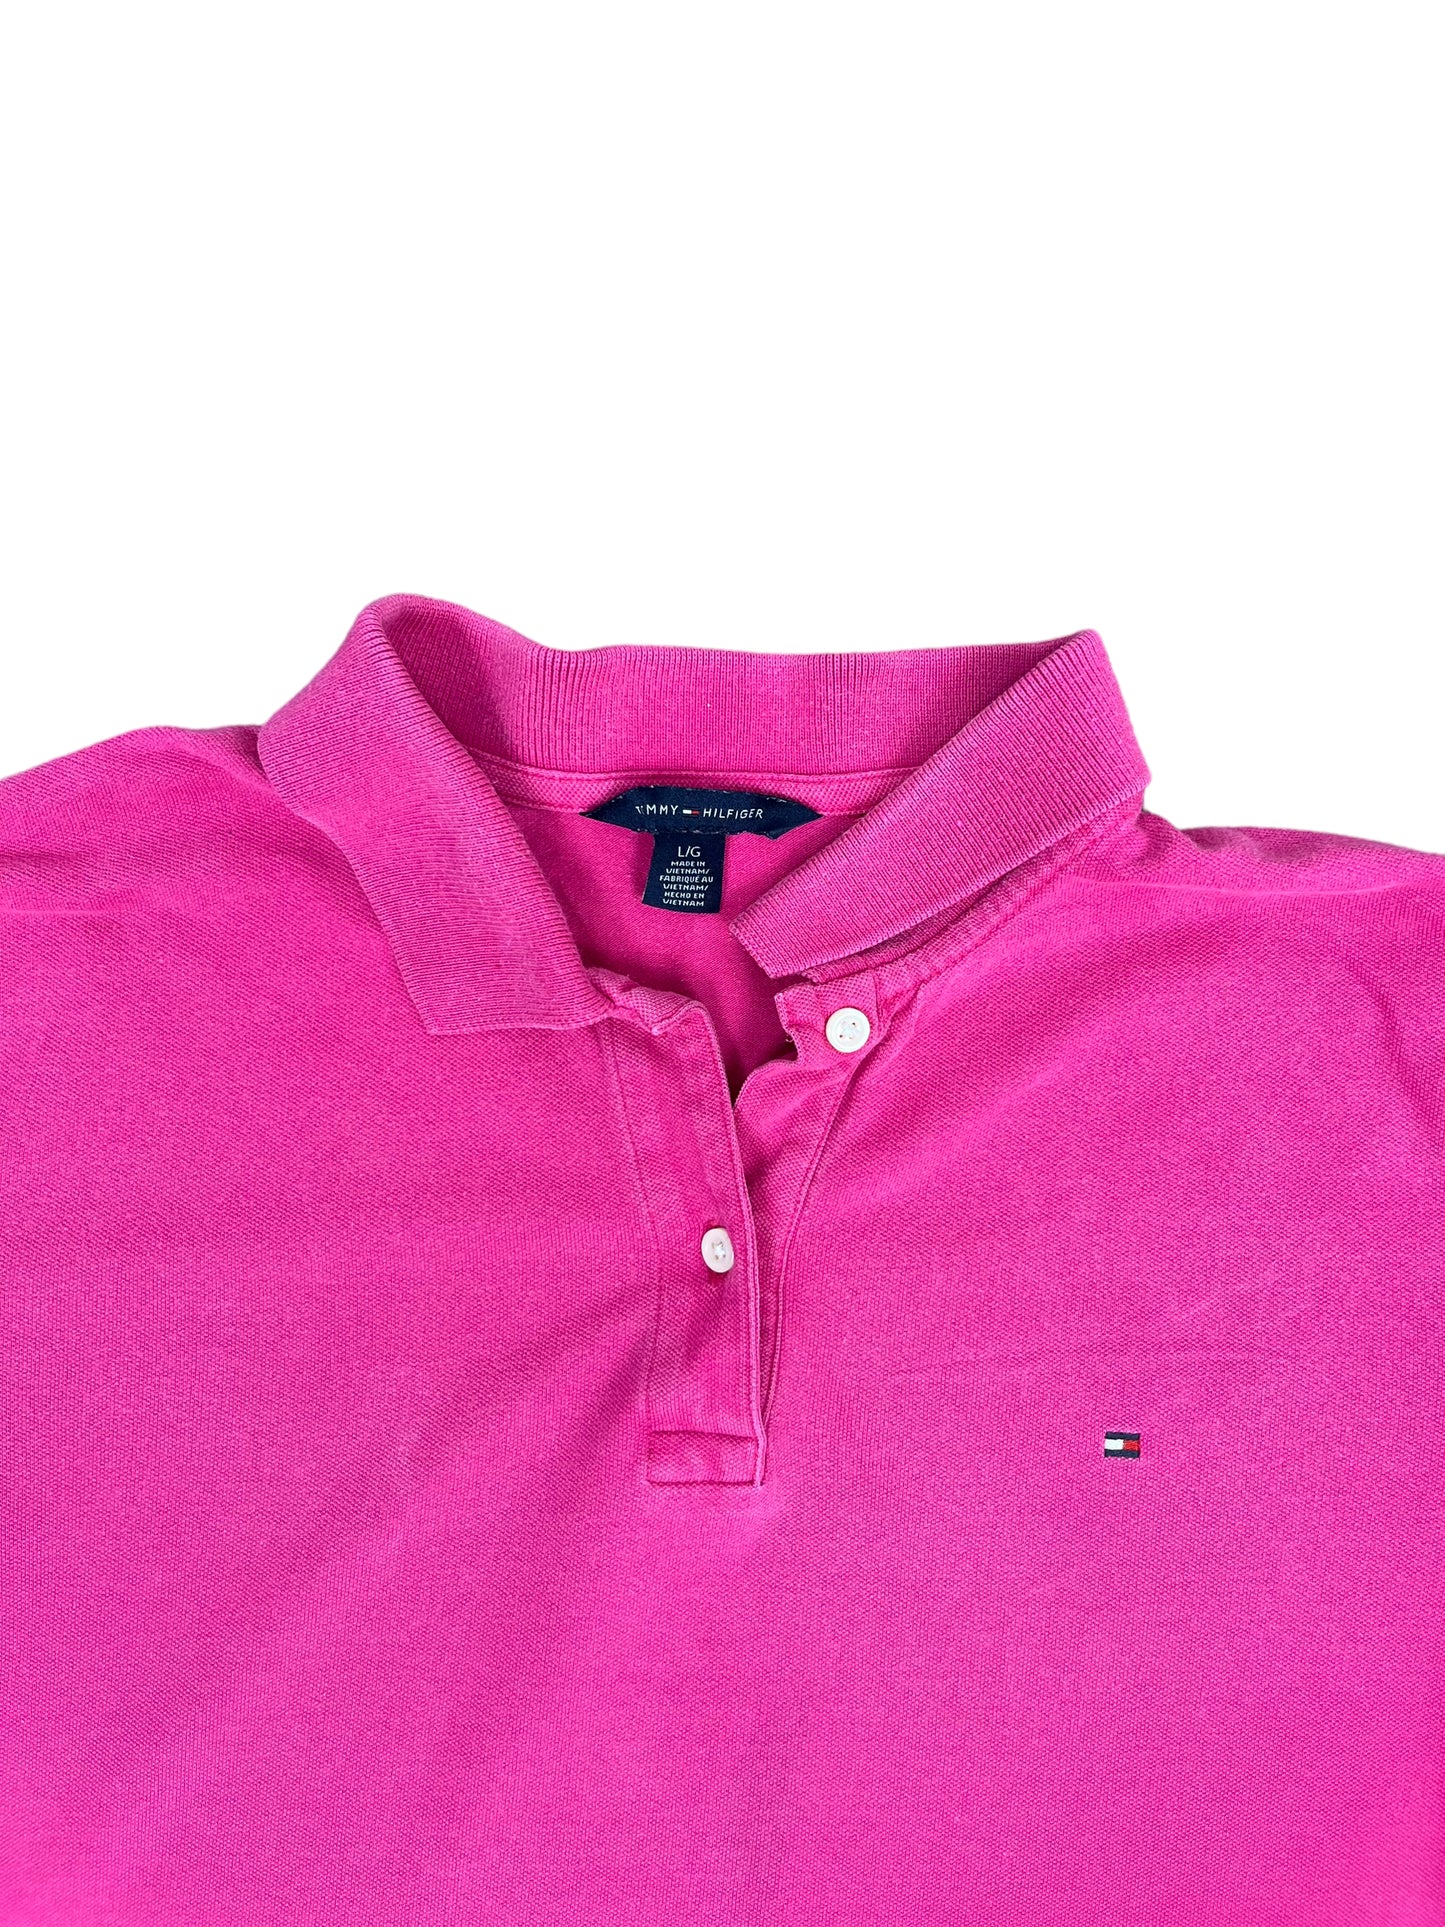 Vintage Tommy Hilfiger Cropped Polo Shirt - Large